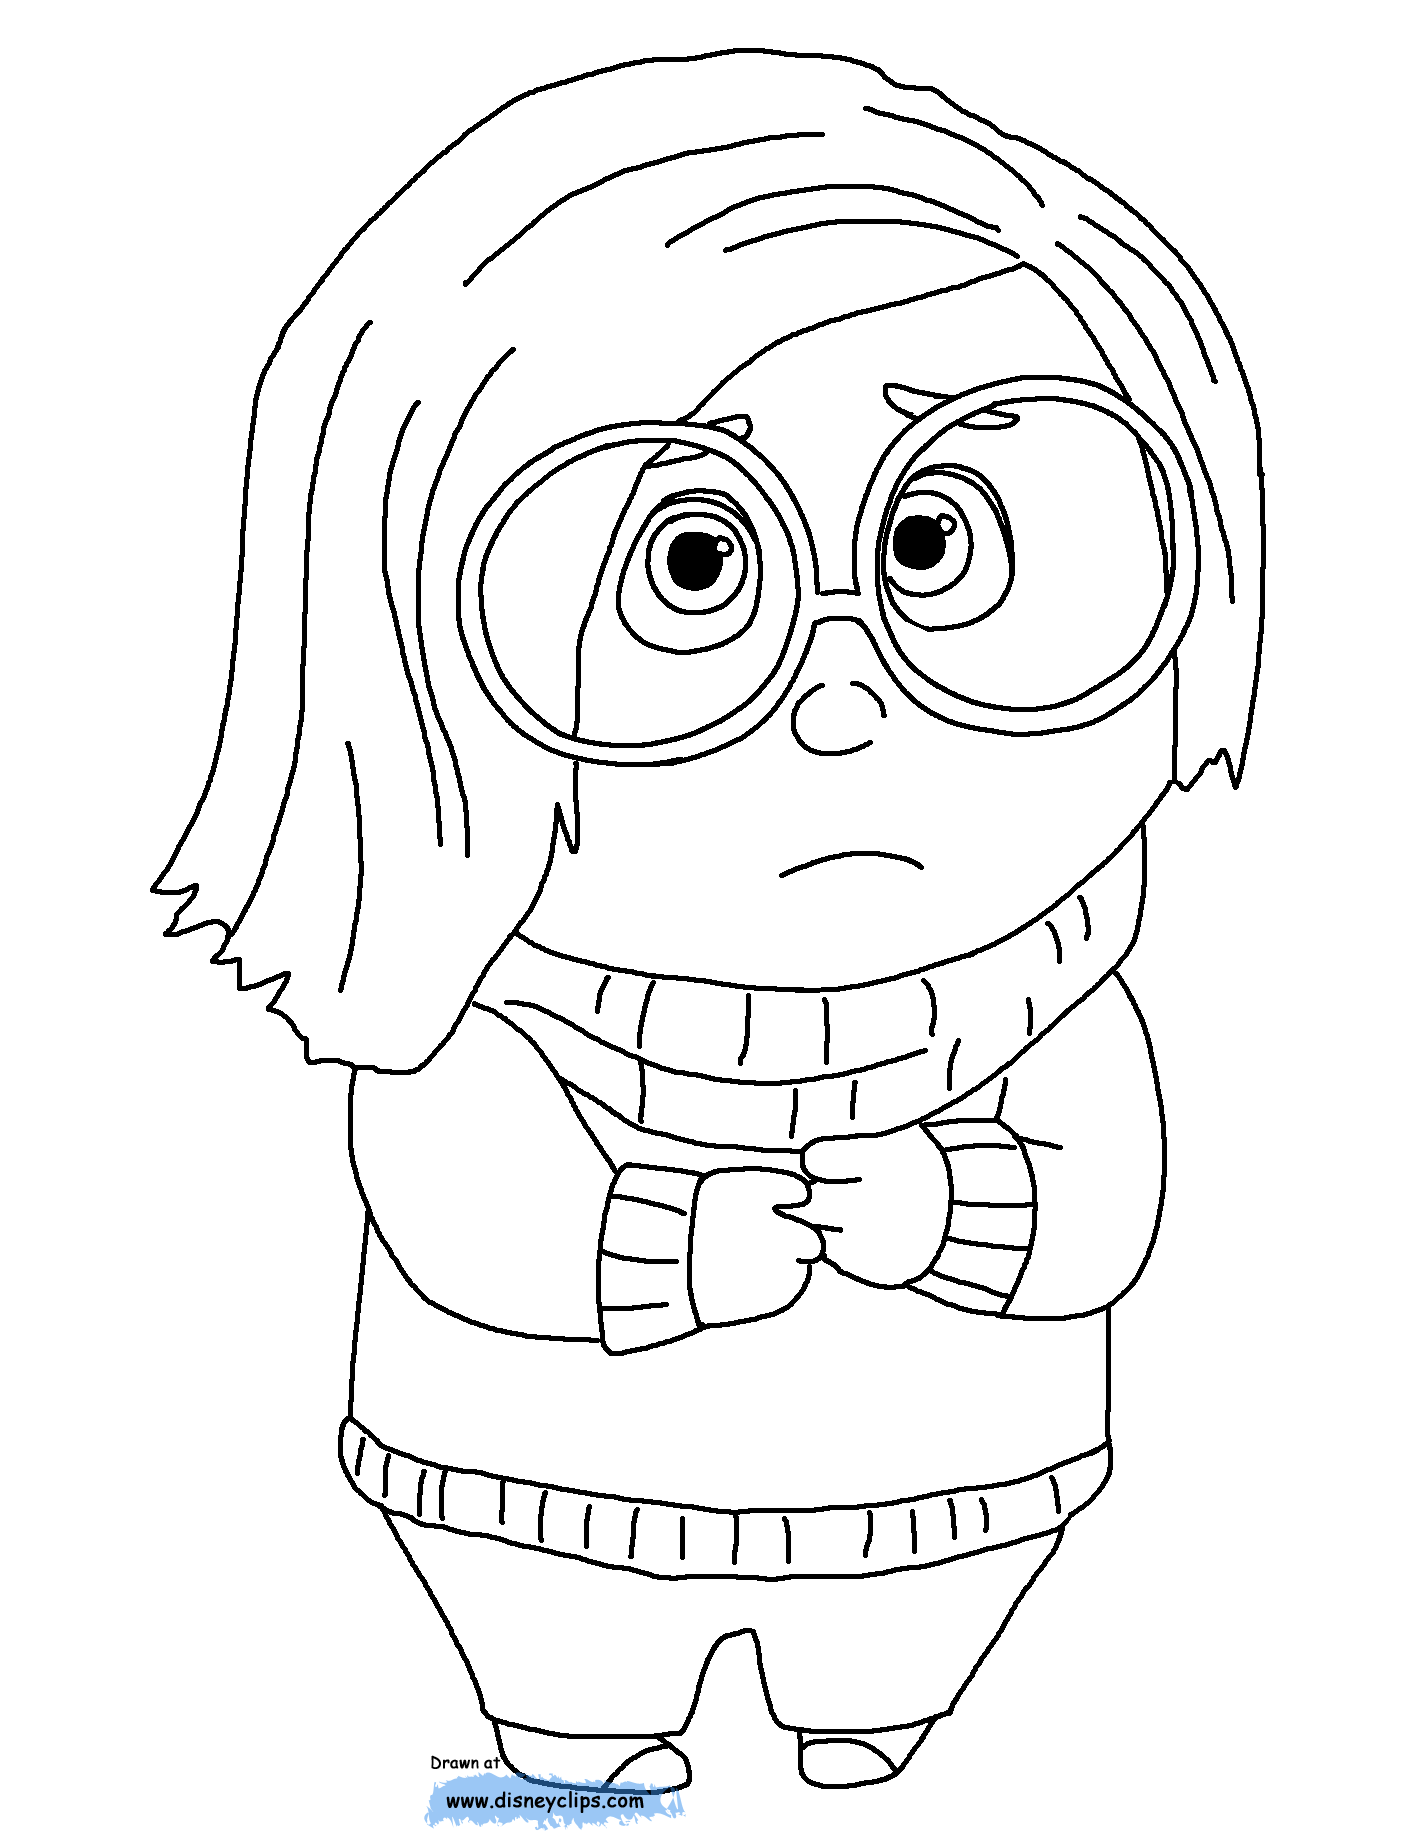 insideout_sadness_coloring - Coloring Kids